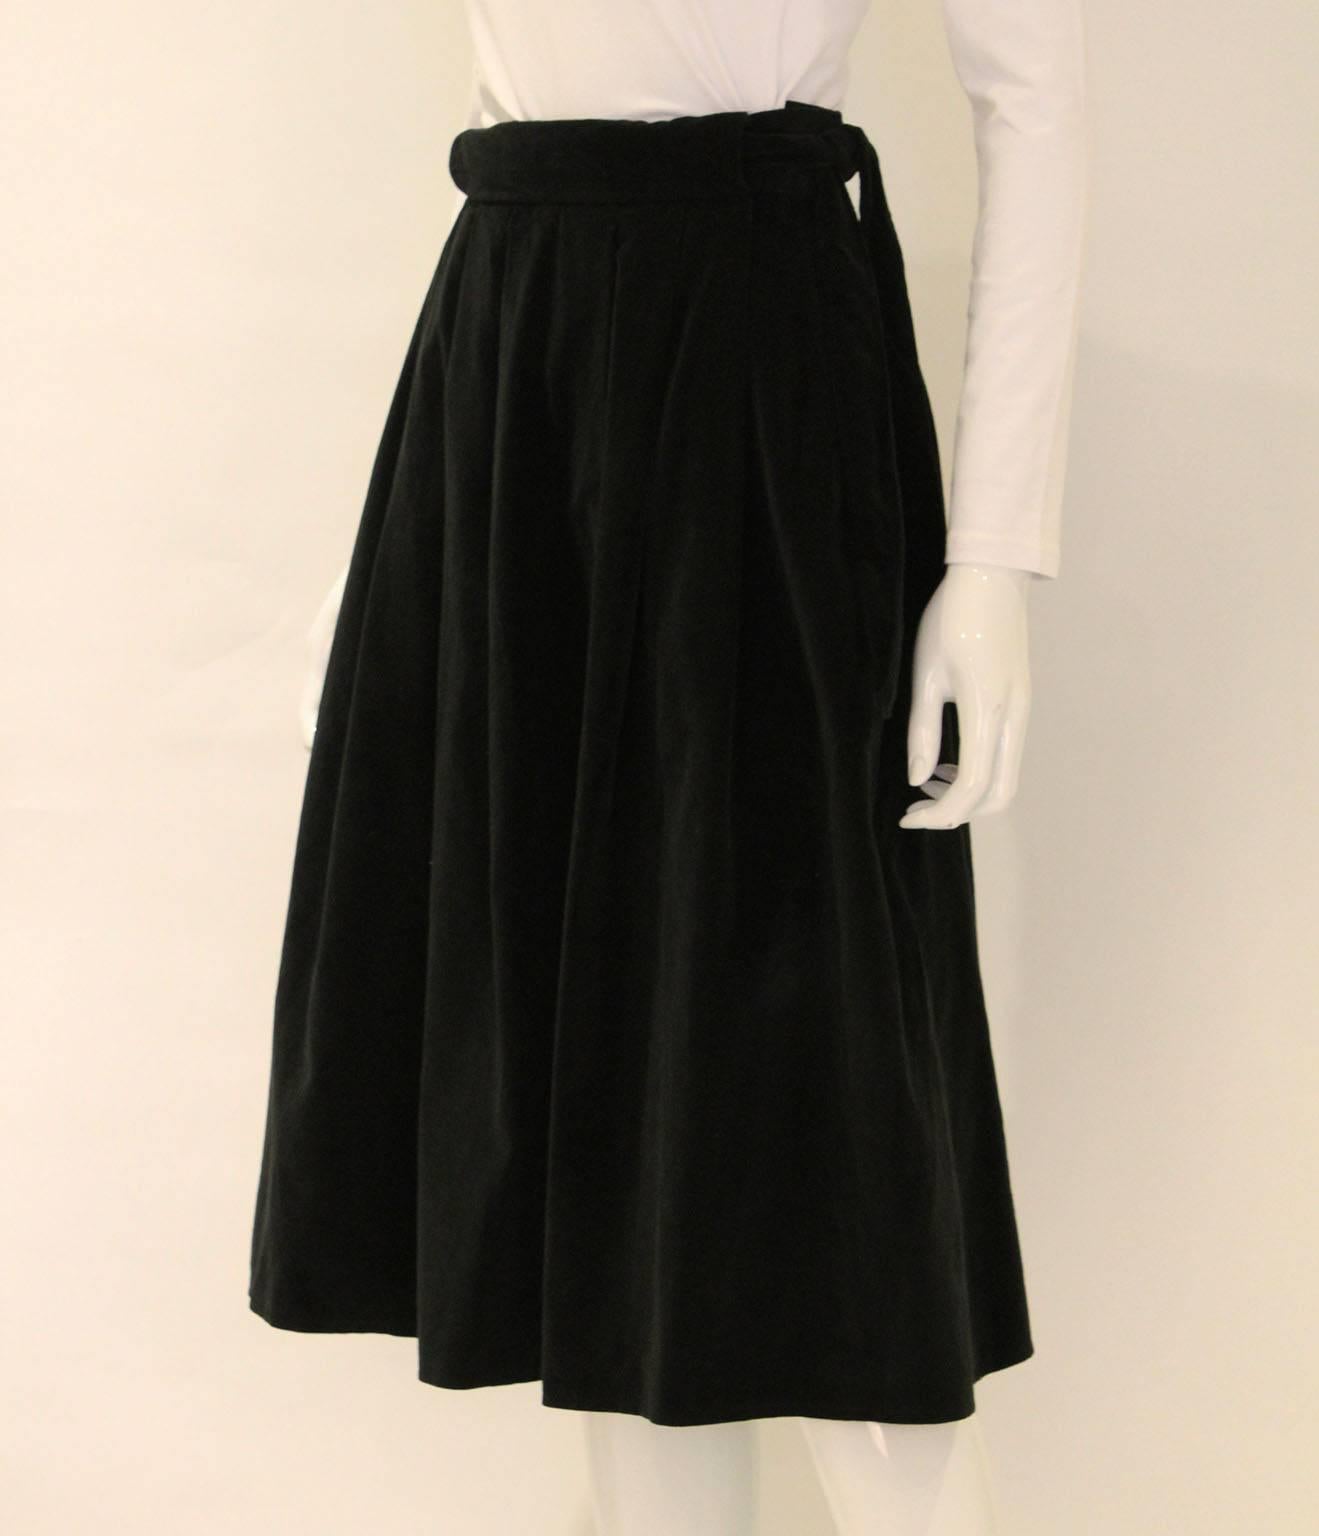 A super skirt by Christian Dior, London. This black velvet skirt dates from the 1970s.It has  one central pleat with two pleats on either side on both  the front and back. There is a size zip fastening and button. In addition, there is a black